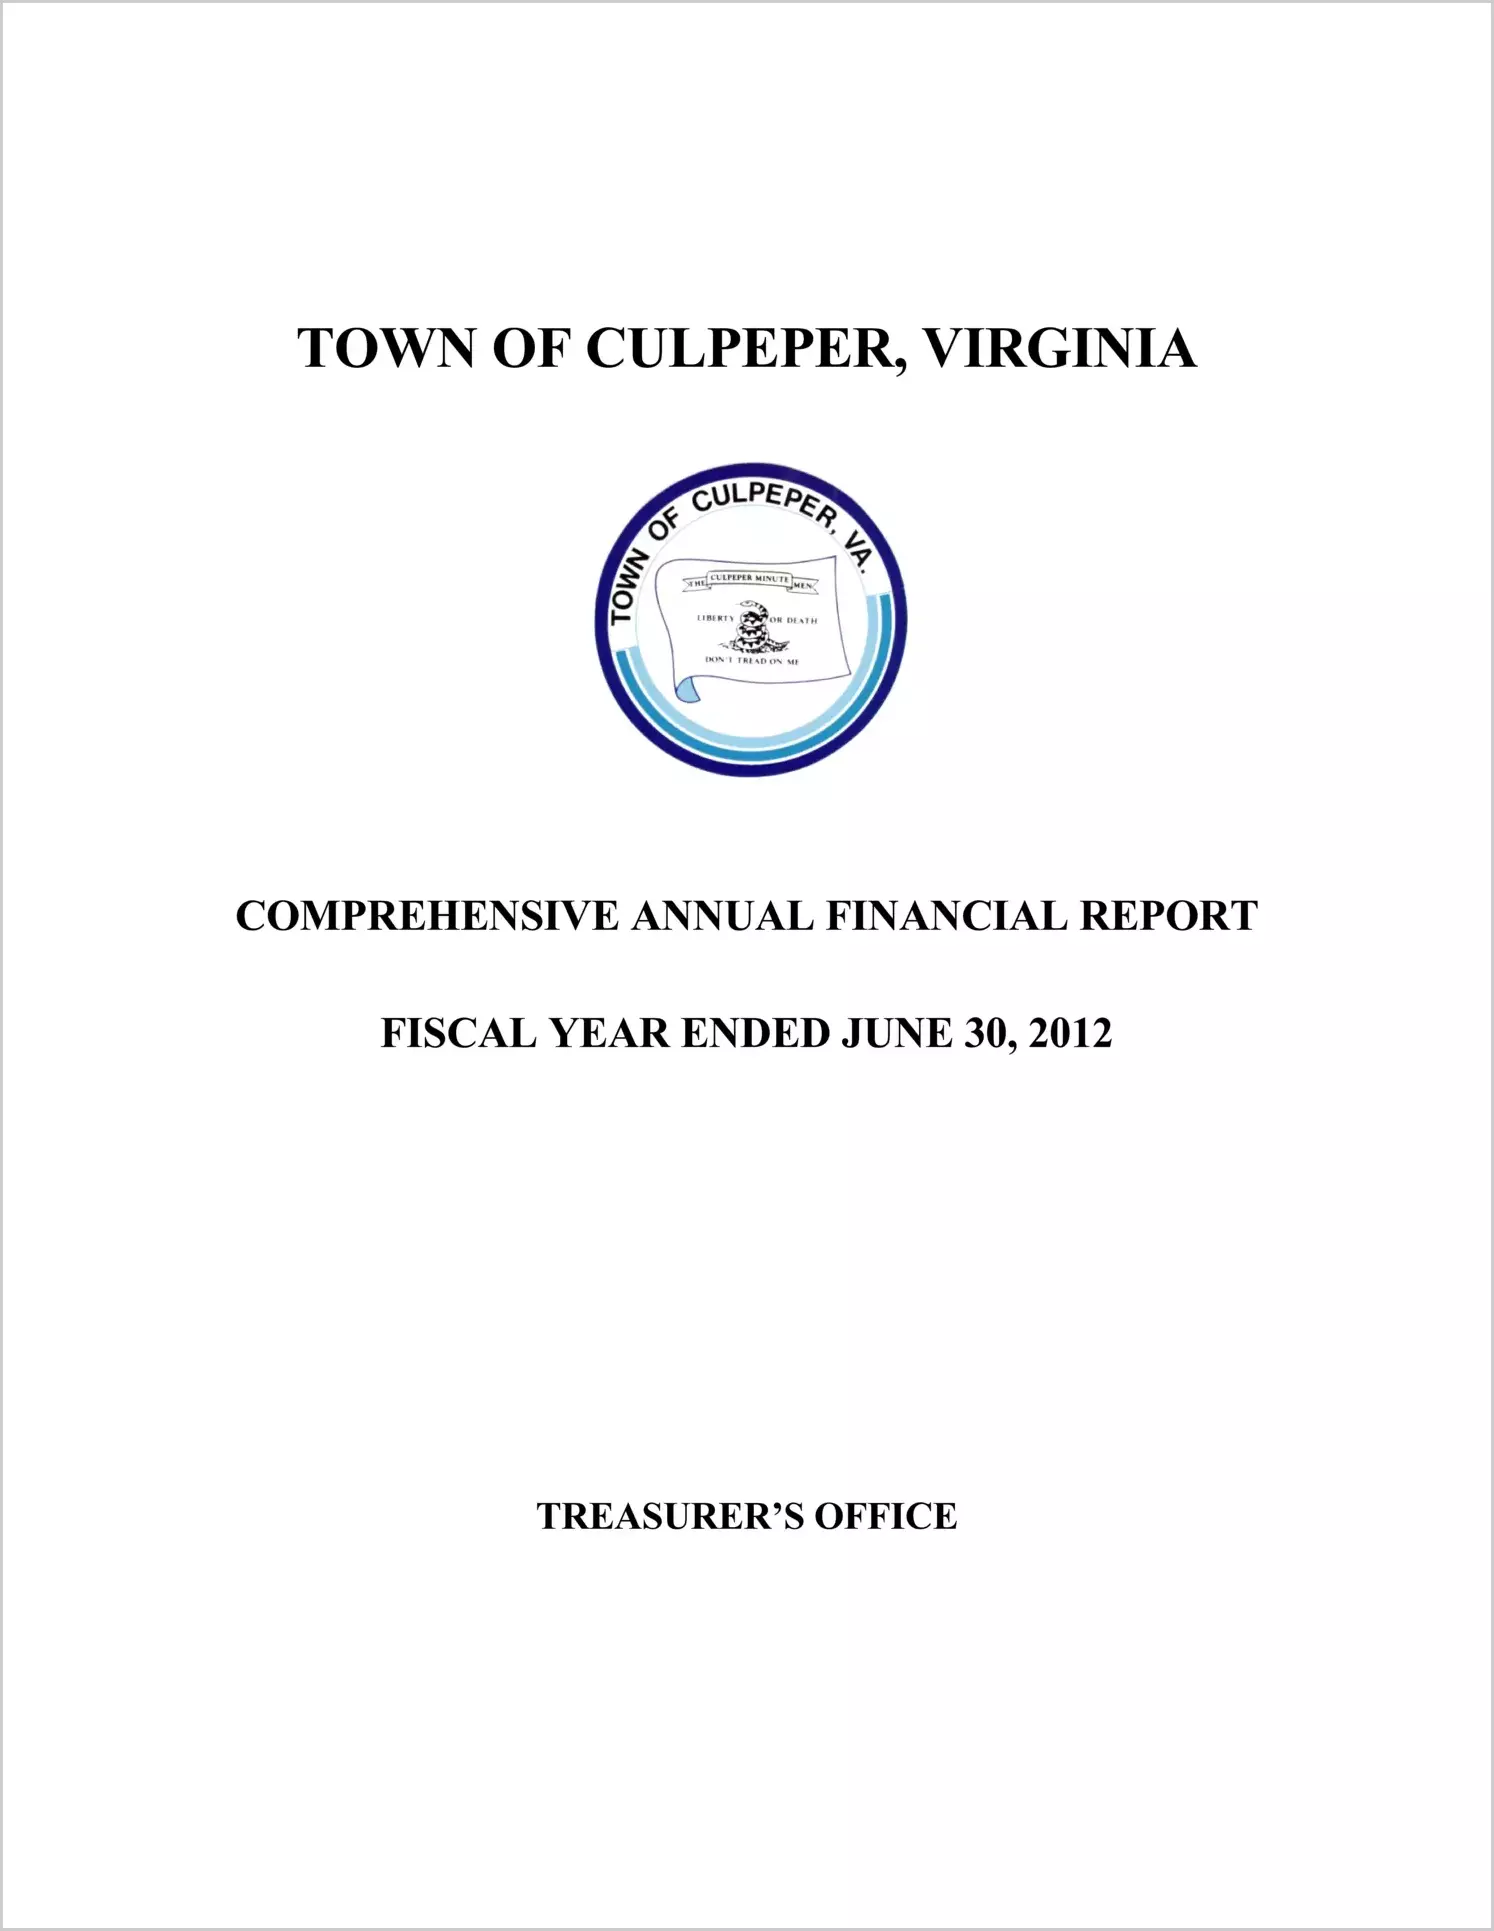 2012 Annual Financial Report for Town of Culpeper